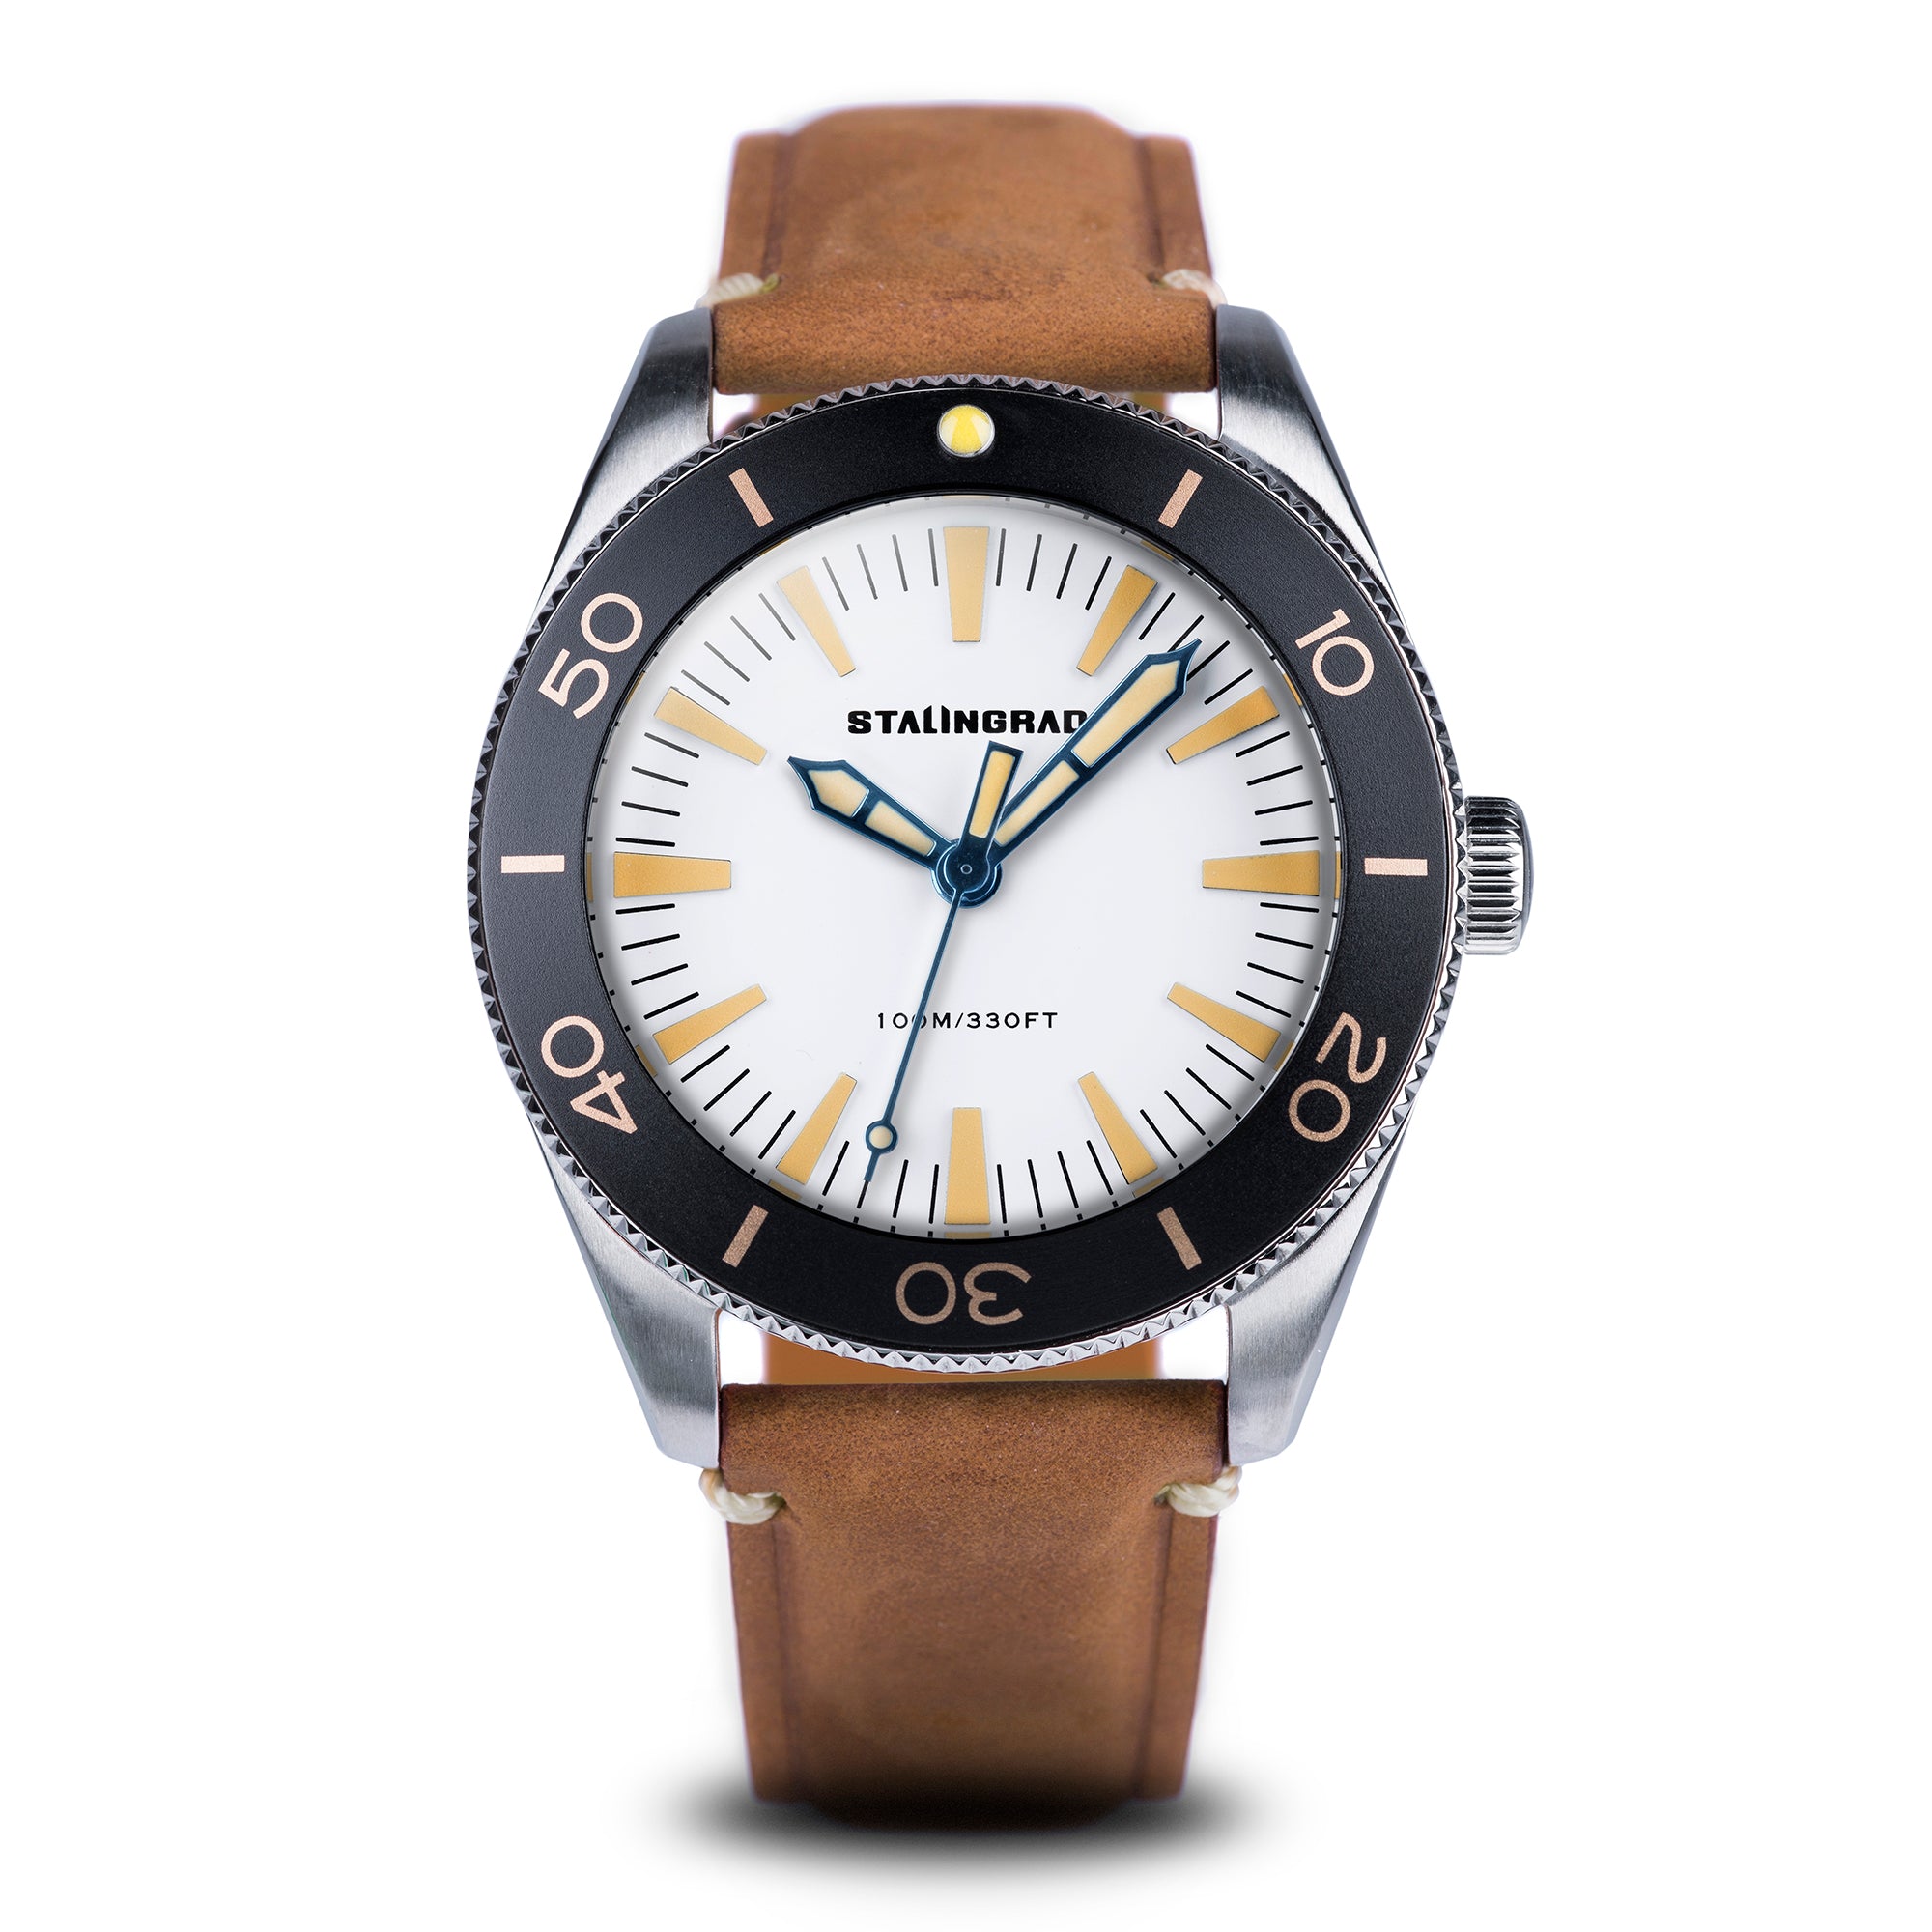 Stalingrad Iron Will Watch White Dial with a Black Bezel and a tan leather strap on a white background, front view